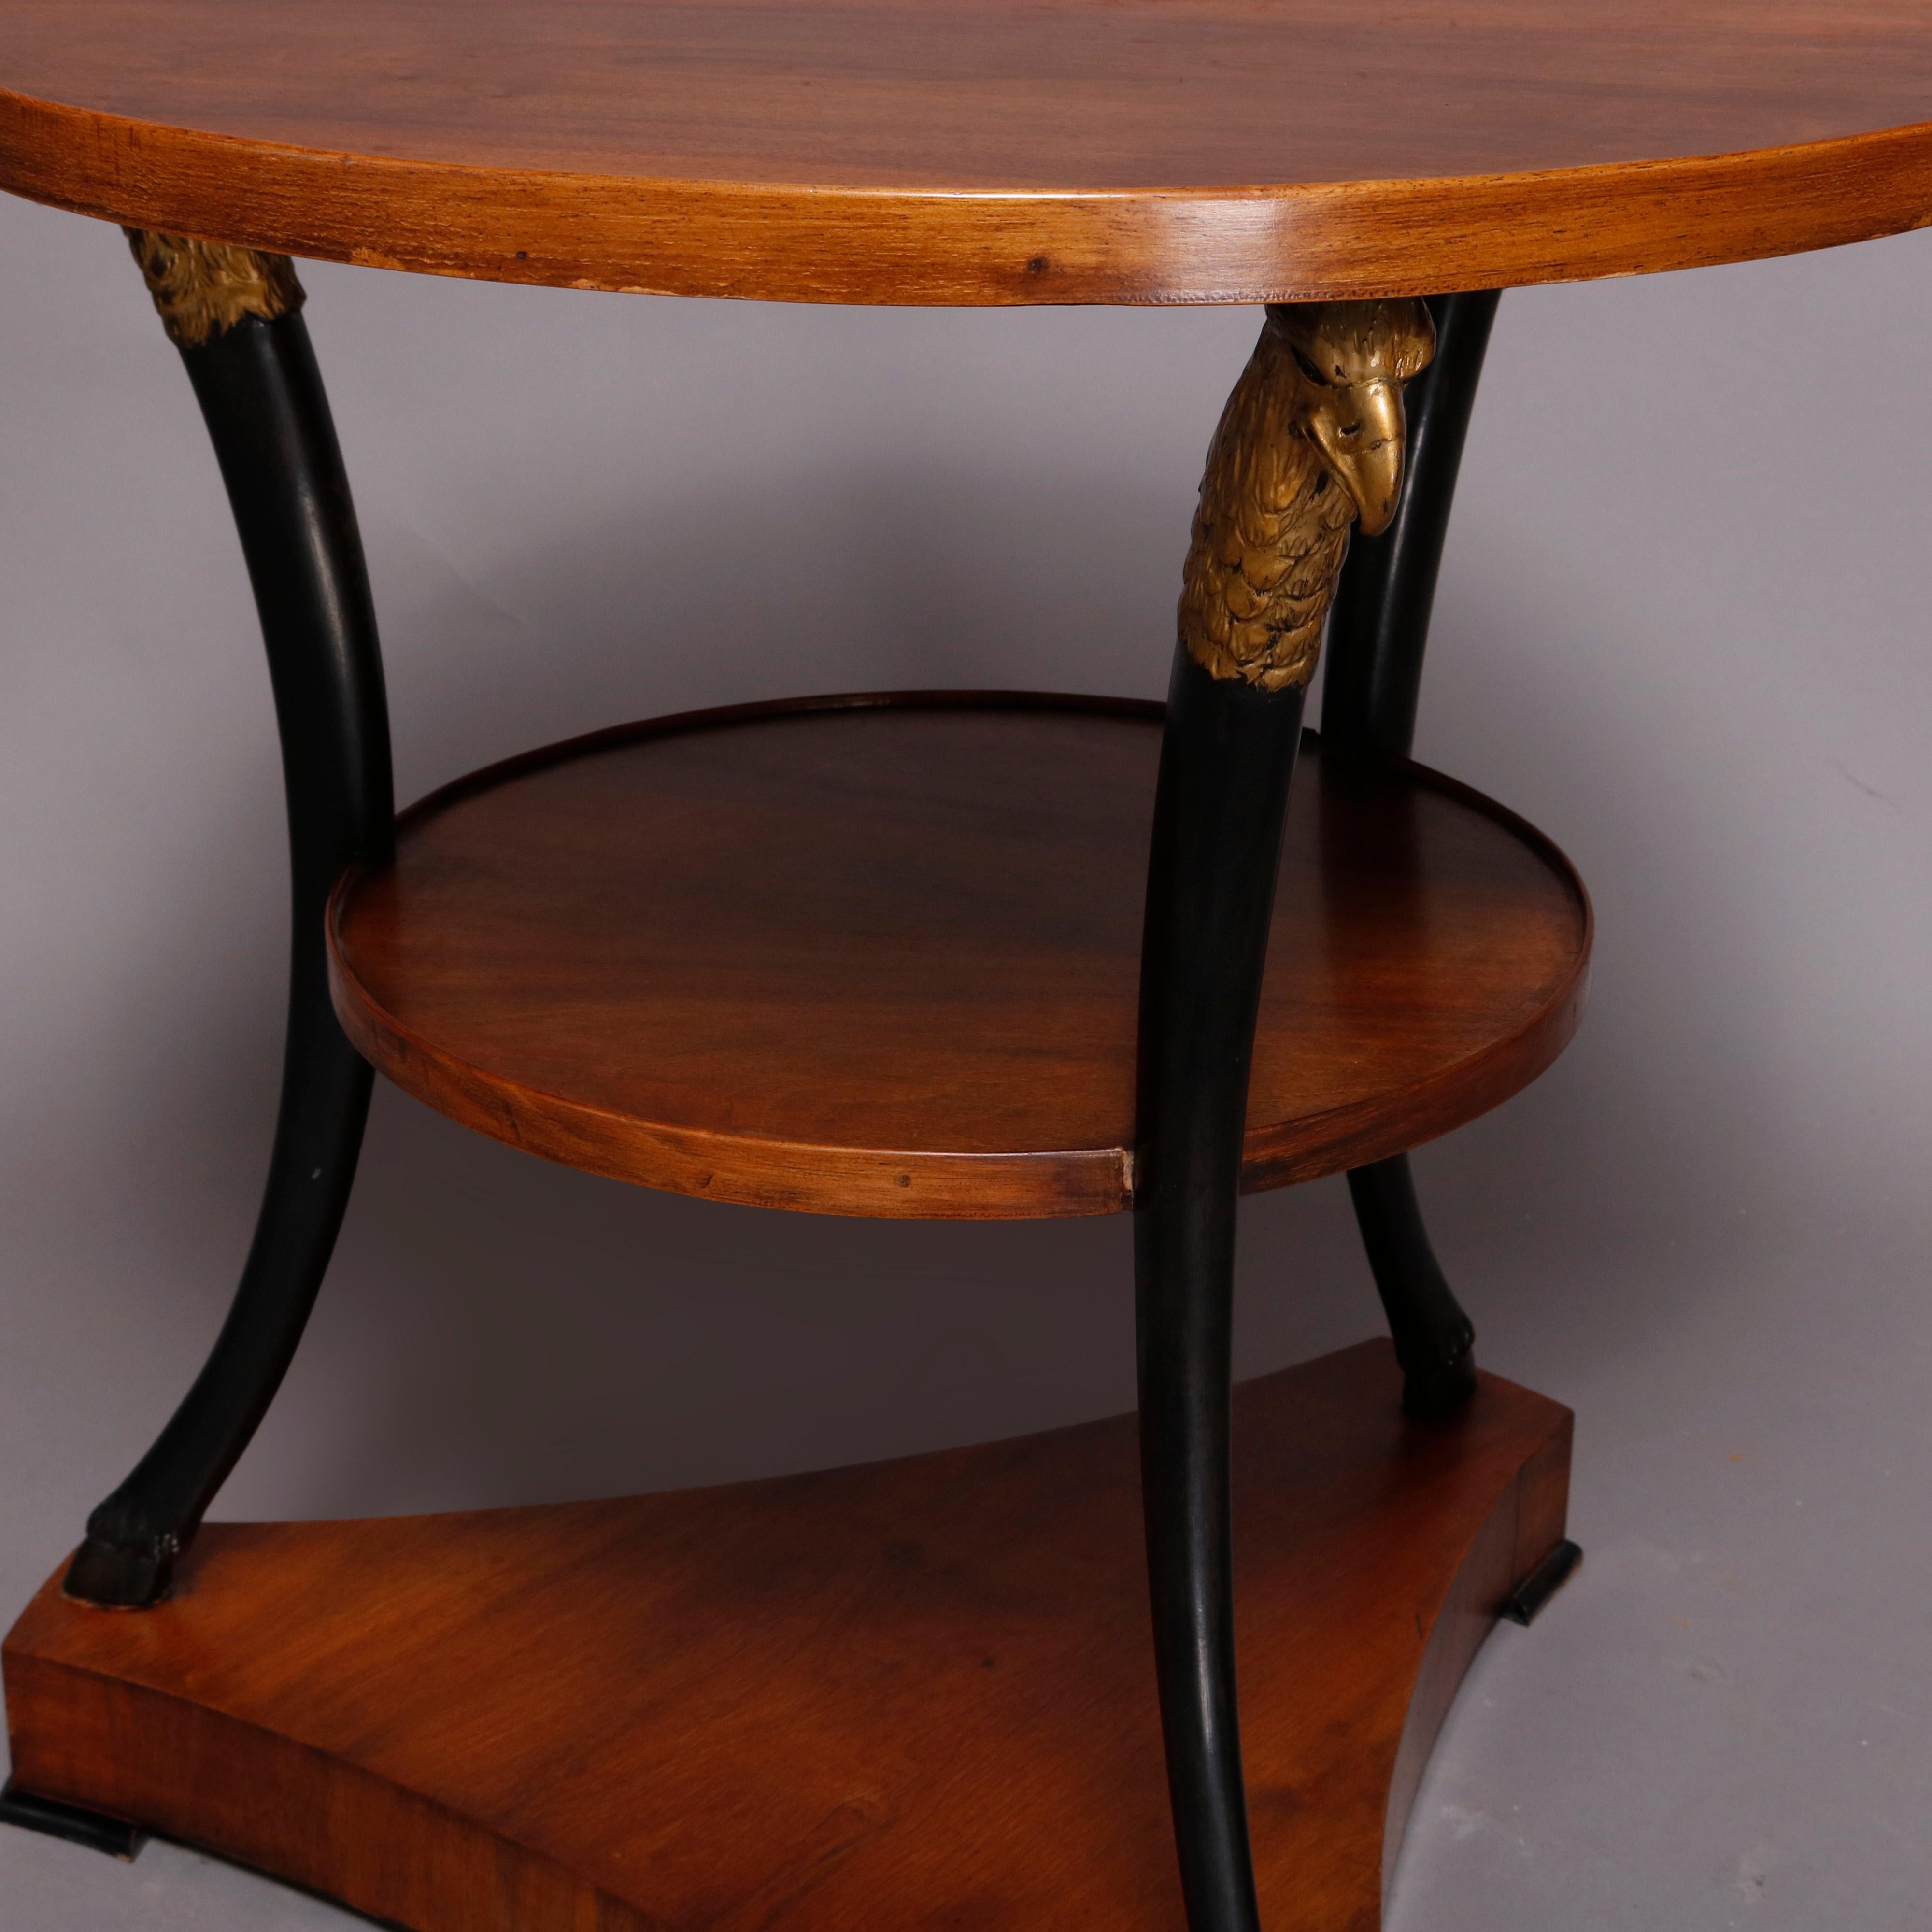 A vintage French Empire figural lamp stand offers mahogany construction with round top surmounting lower round display supported by three convex ebonized supports each having a gilt falcon head and terminating in a hoof foot seated on triangular